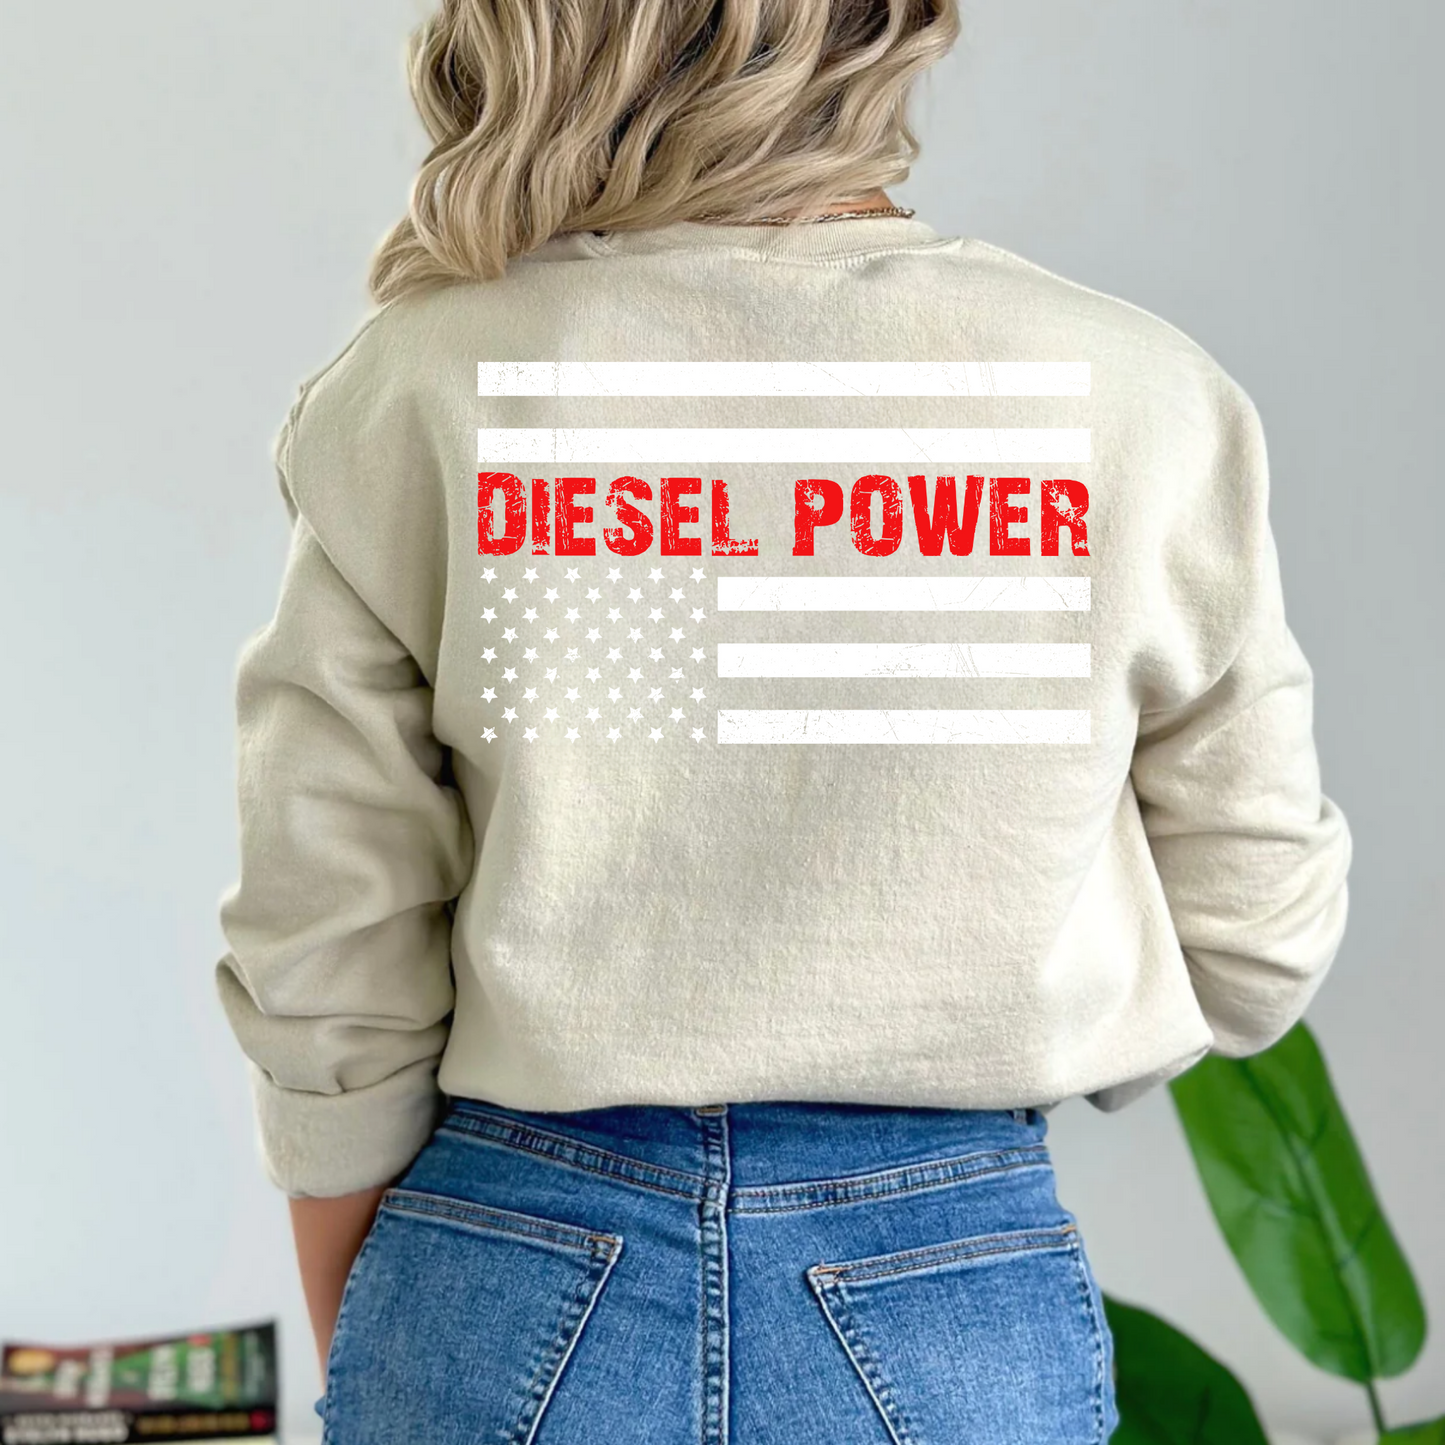 (shirt not included) Diesel Power - Matte Clear Film Transfer